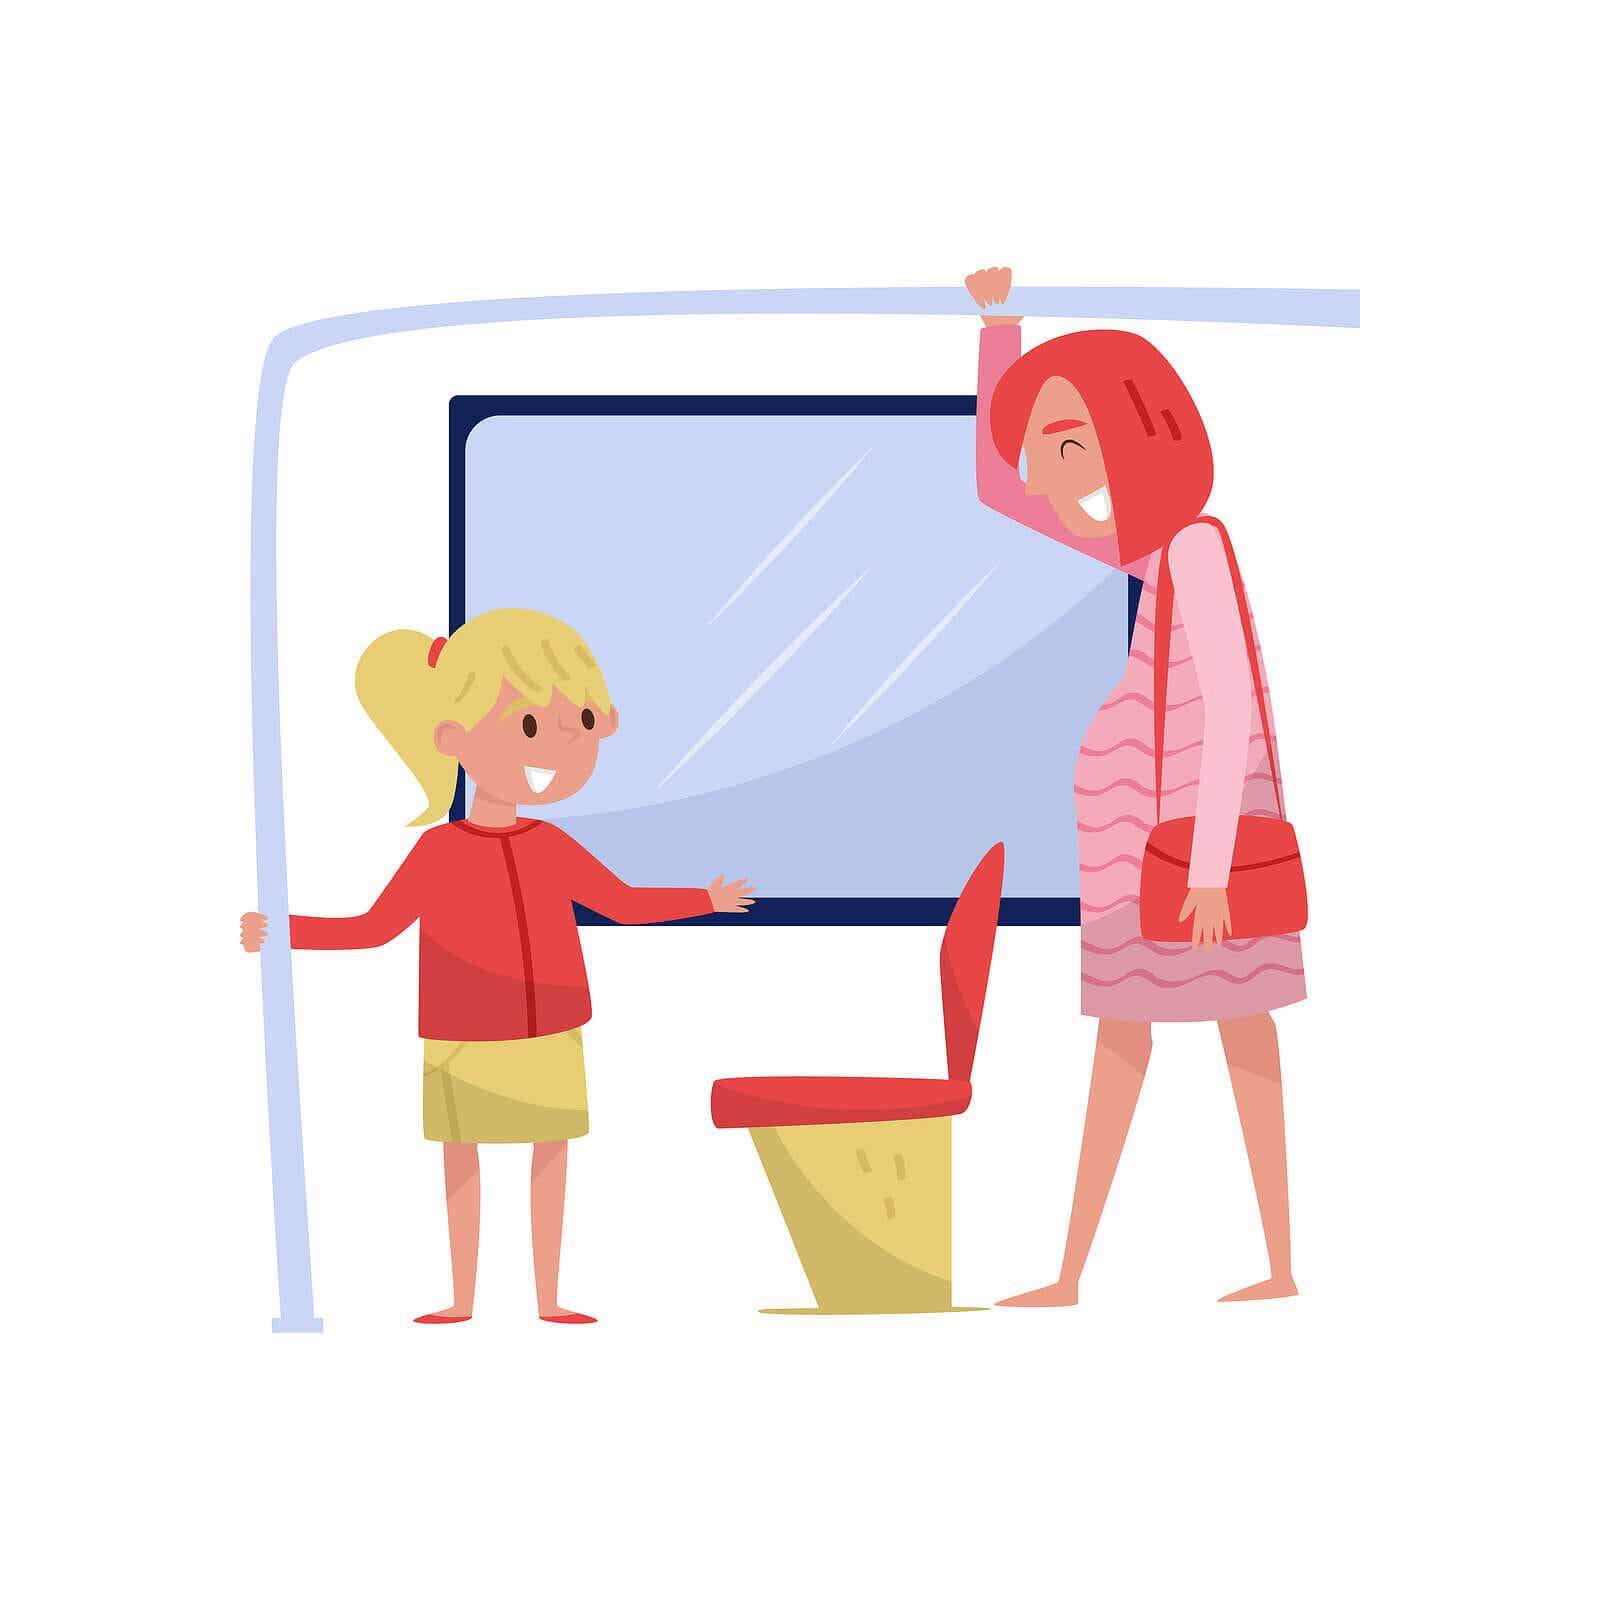 A cartoon image of a small girl giving her seat to a pregnant woman on the bus.